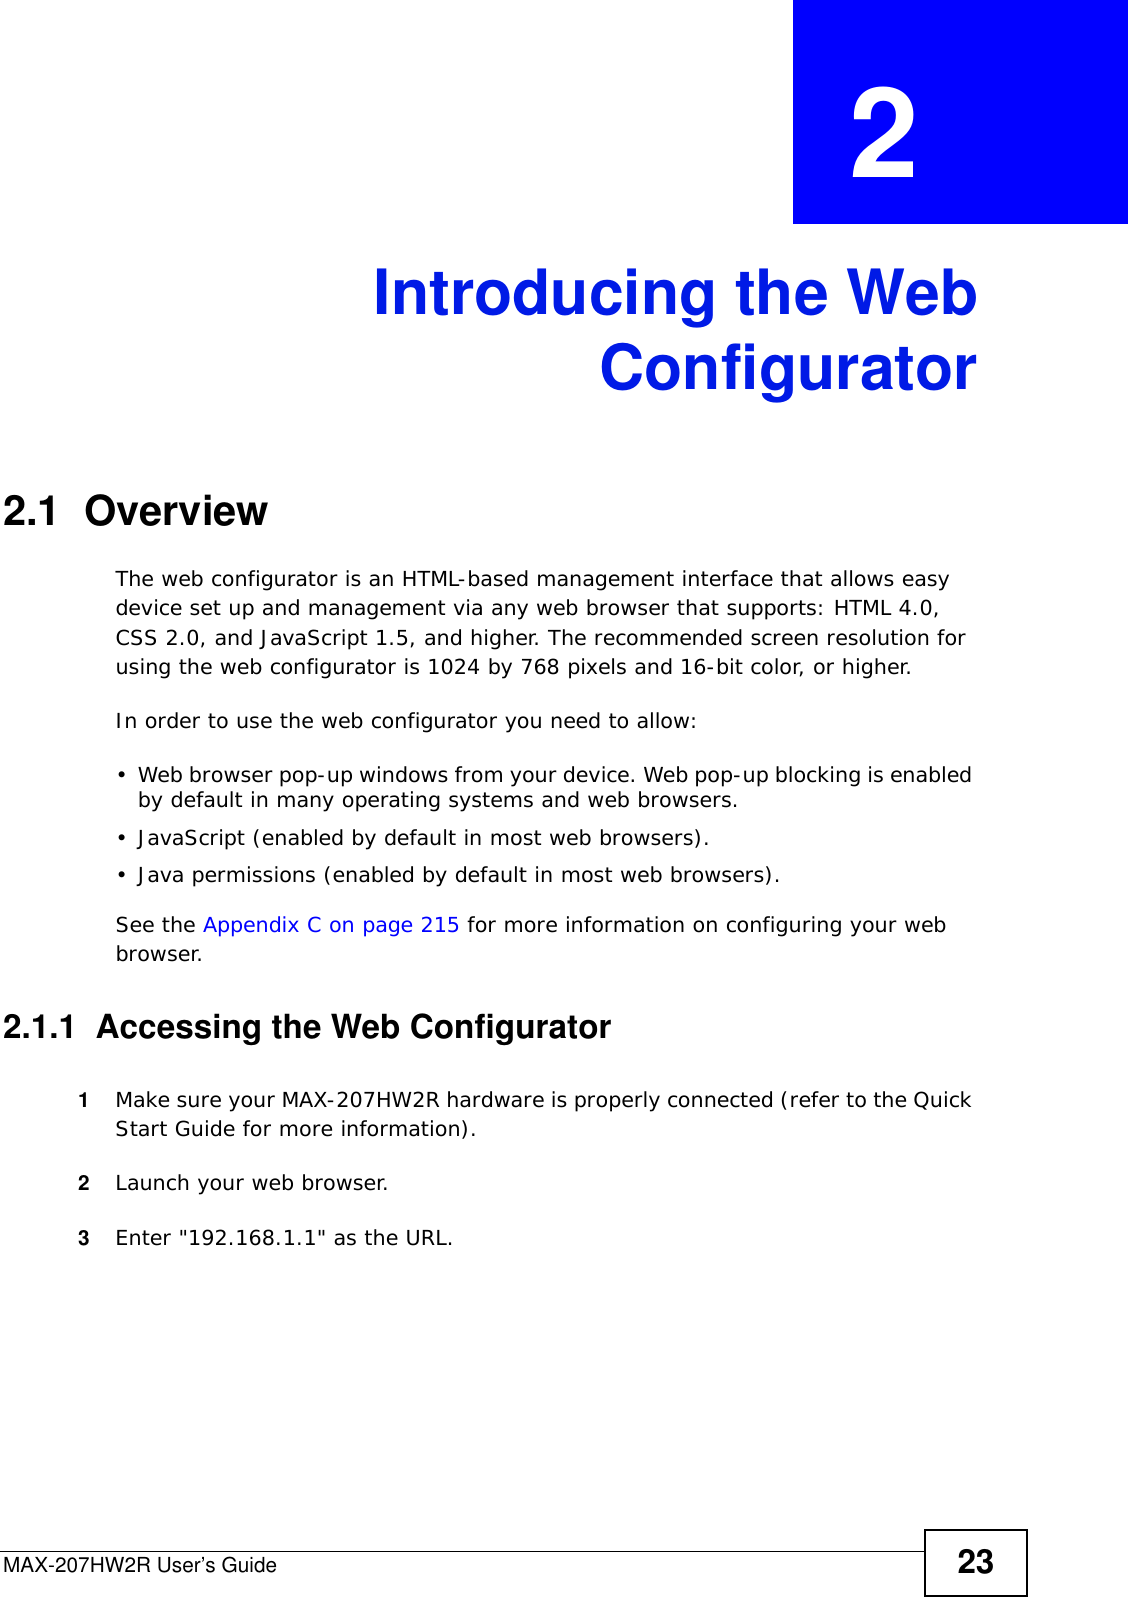 MAX-207HW2R User’s Guide 23CHAPTER  2 Introducing the WebConfigurator2.1  OverviewThe web configurator is an HTML-based management interface that allows easy device set up and management via any web browser that supports: HTML 4.0, CSS 2.0, and JavaScript 1.5, and higher. The recommended screen resolution for using the web configurator is 1024 by 768 pixels and 16-bit color, or higher.In order to use the web configurator you need to allow:• Web browser pop-up windows from your device. Web pop-up blocking is enabled by default in many operating systems and web browsers.• JavaScript (enabled by default in most web browsers).• Java permissions (enabled by default in most web browsers).See the Appendix C on page 215 for more information on configuring your web browser.2.1.1  Accessing the Web Configurator1Make sure your MAX-207HW2R hardware is properly connected (refer to the Quick Start Guide for more information).2Launch your web browser.3Enter &quot;192.168.1.1&quot; as the URL.